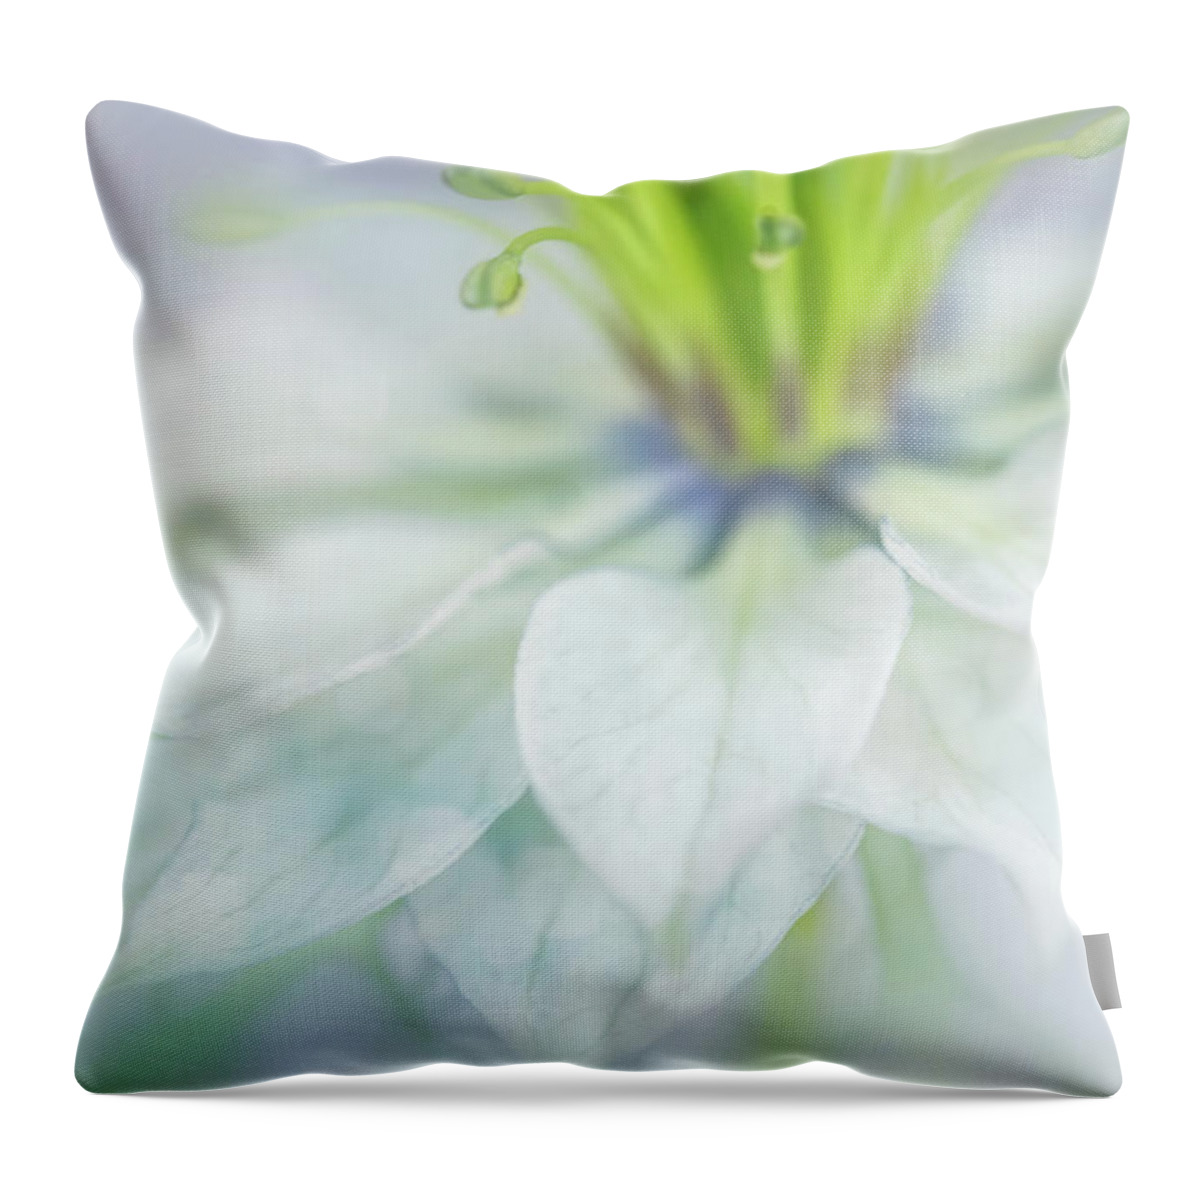 Photography Throw Pillow featuring the digital art Lovely Petals by Terry Davis